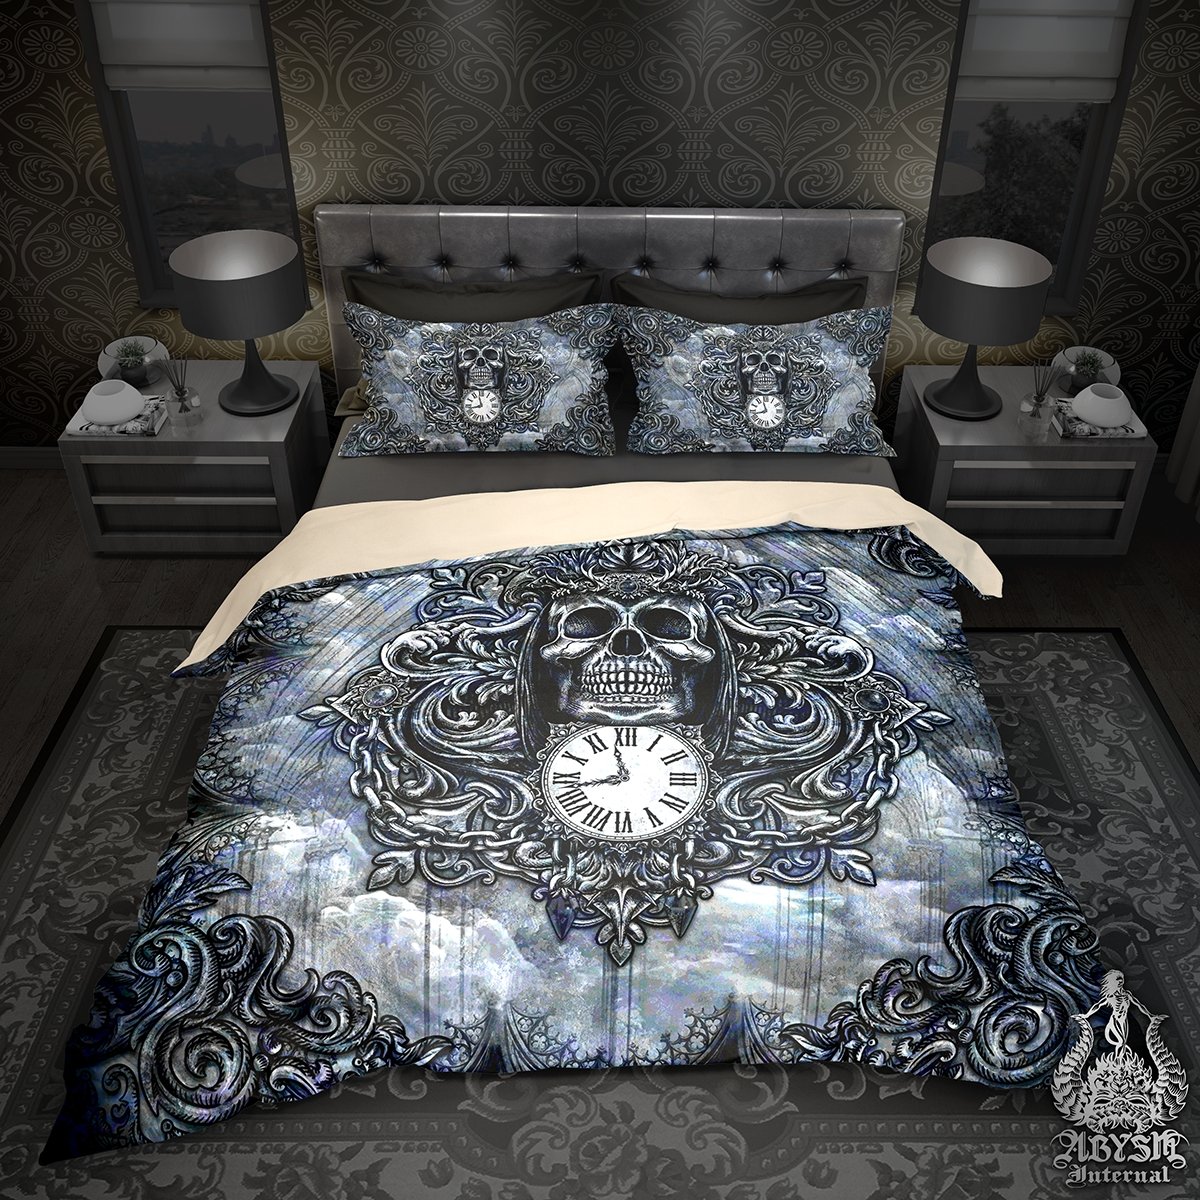 Skull Bedding Set, Comforter and Duvet, Goth Bed Cover and Bedroom Decor, King, Queen and Twin Size - Reaper, Blue - Abysm Internal